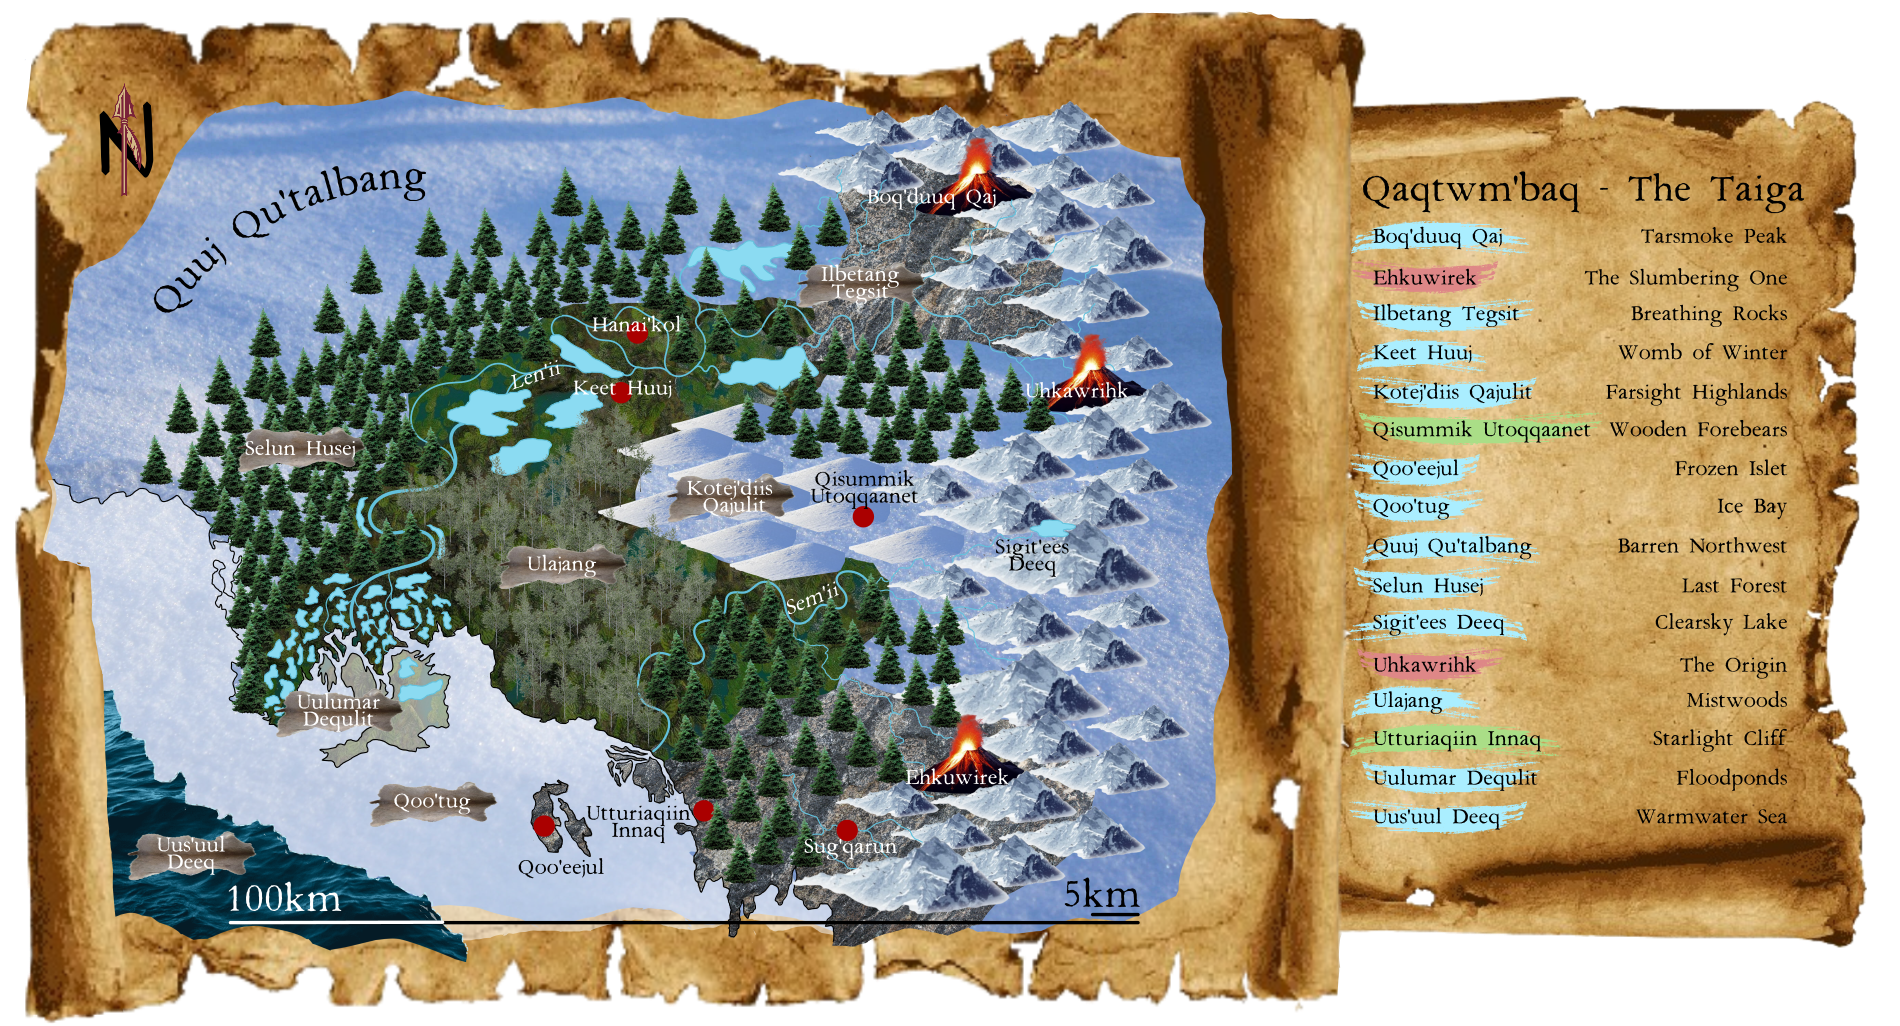 On the left, a large scroll with a map of the Taiga with frosty swamps, forests, mountains, volcanoes and geysers. On the left, a smaller scroll with English names of the toponyms, color-coded with tribes that named them.